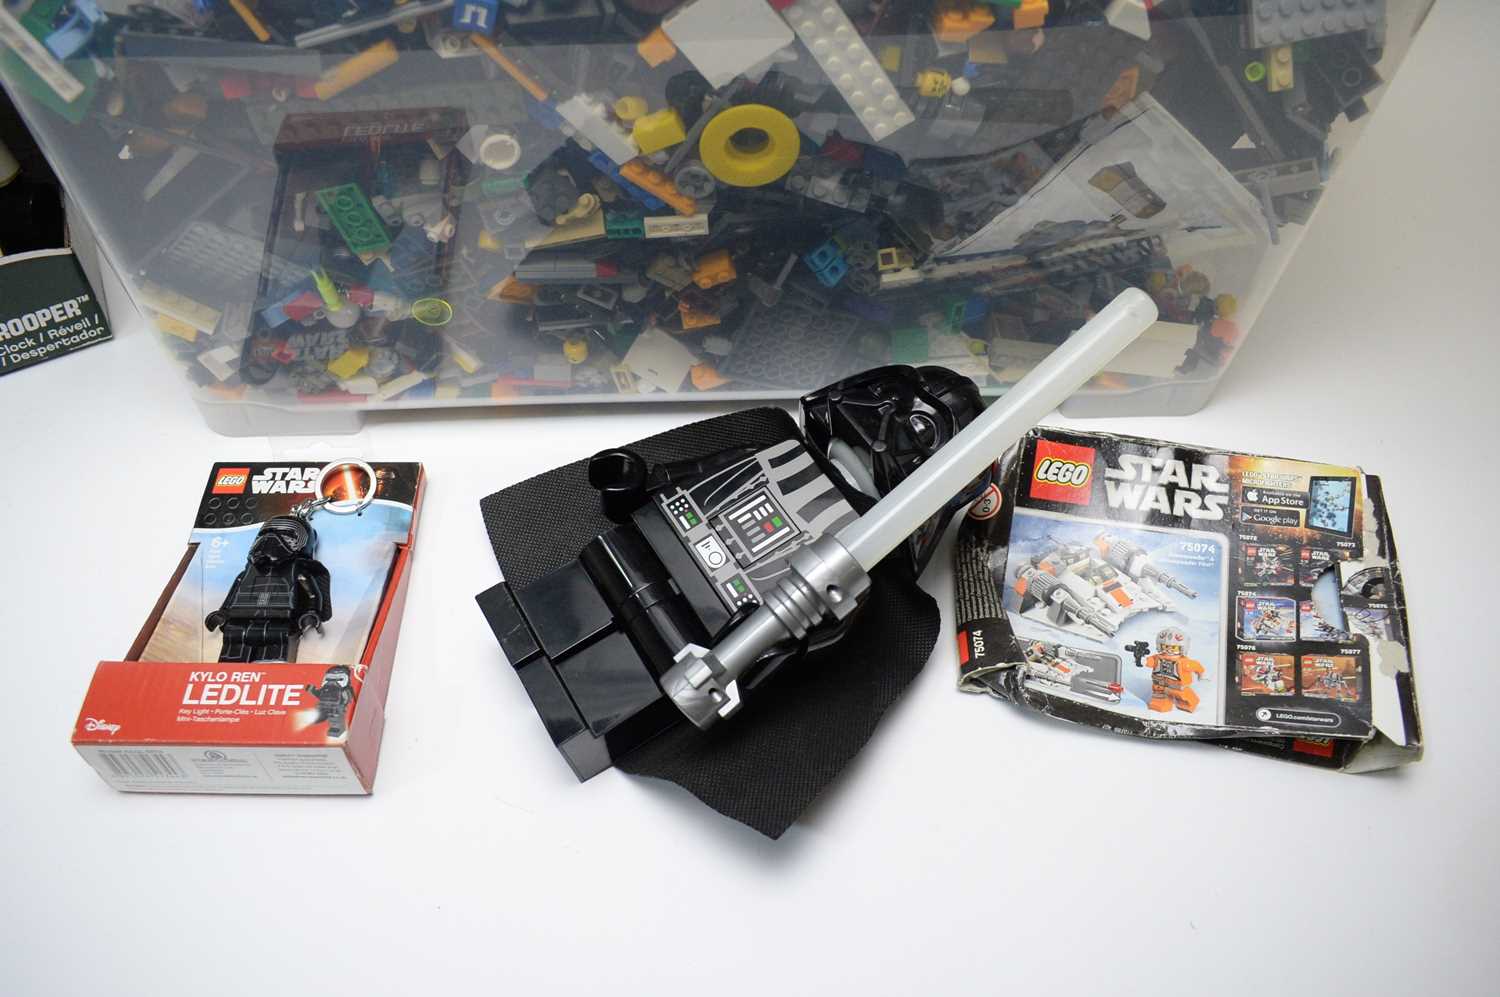 Star Wars LEGO sets and figures. - Image 3 of 5